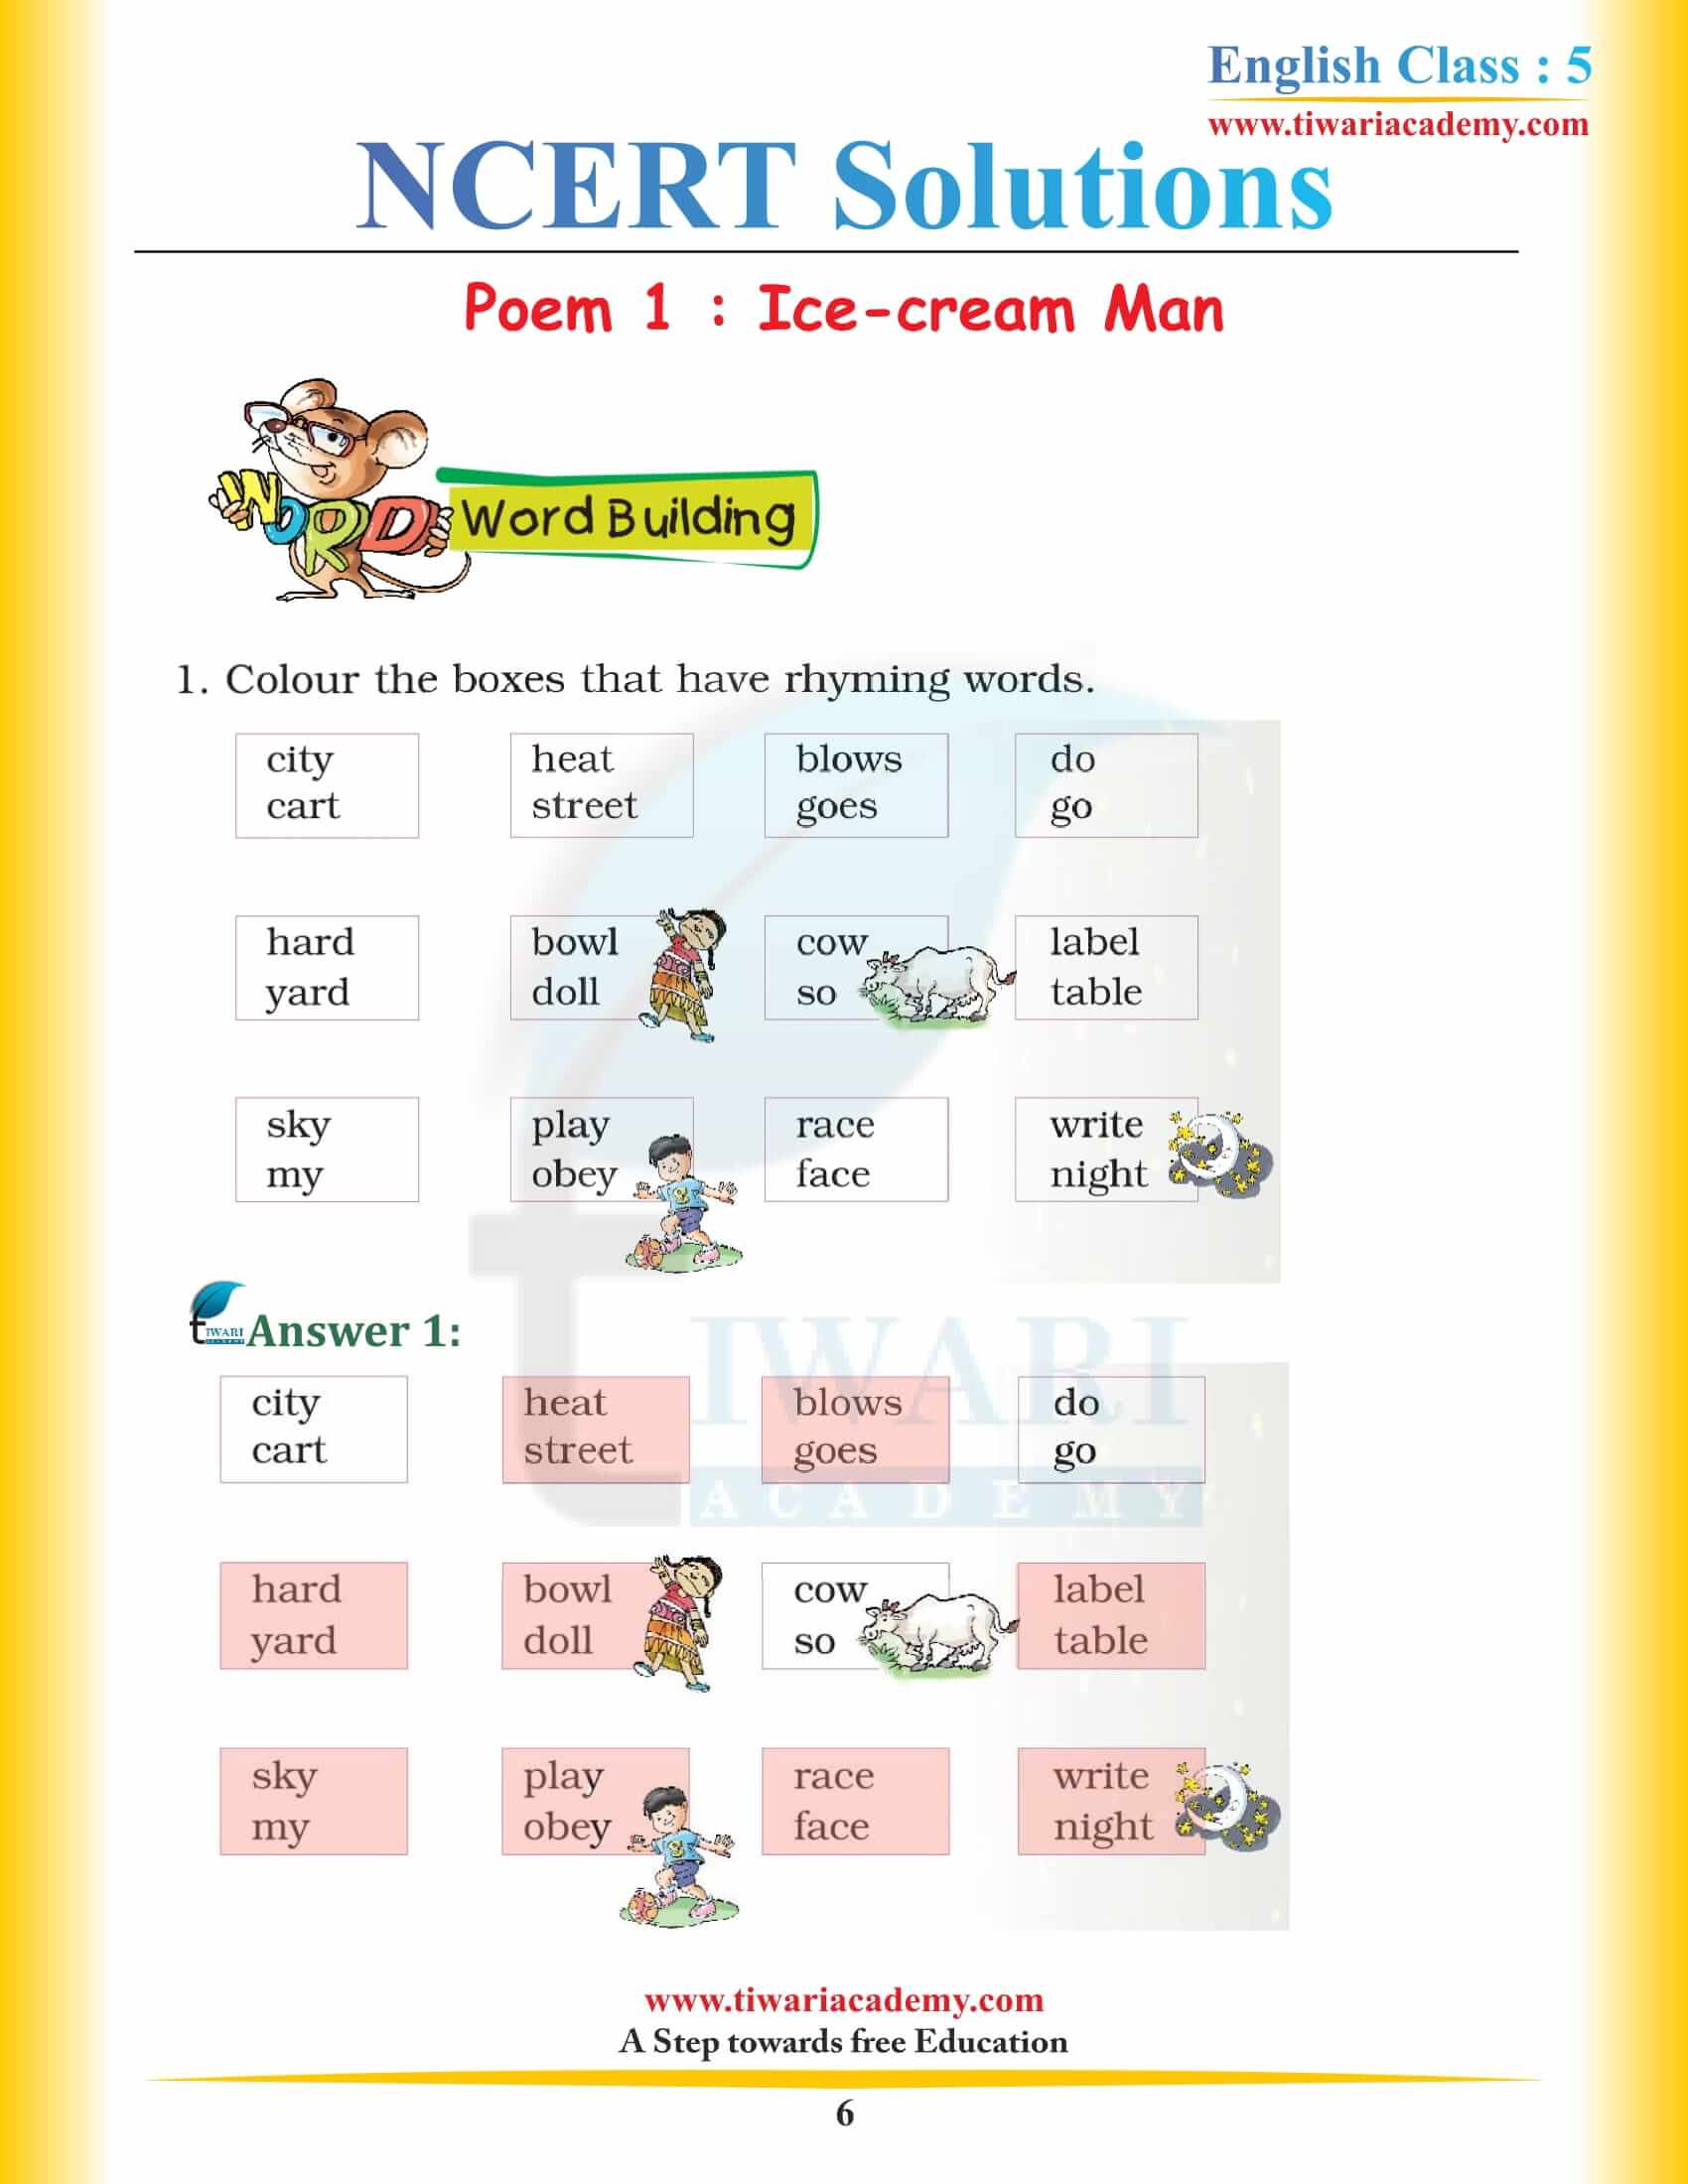 NCERT Solutions for Class 5 English Chapter 1 Ice-cream Man in Hindi Medium